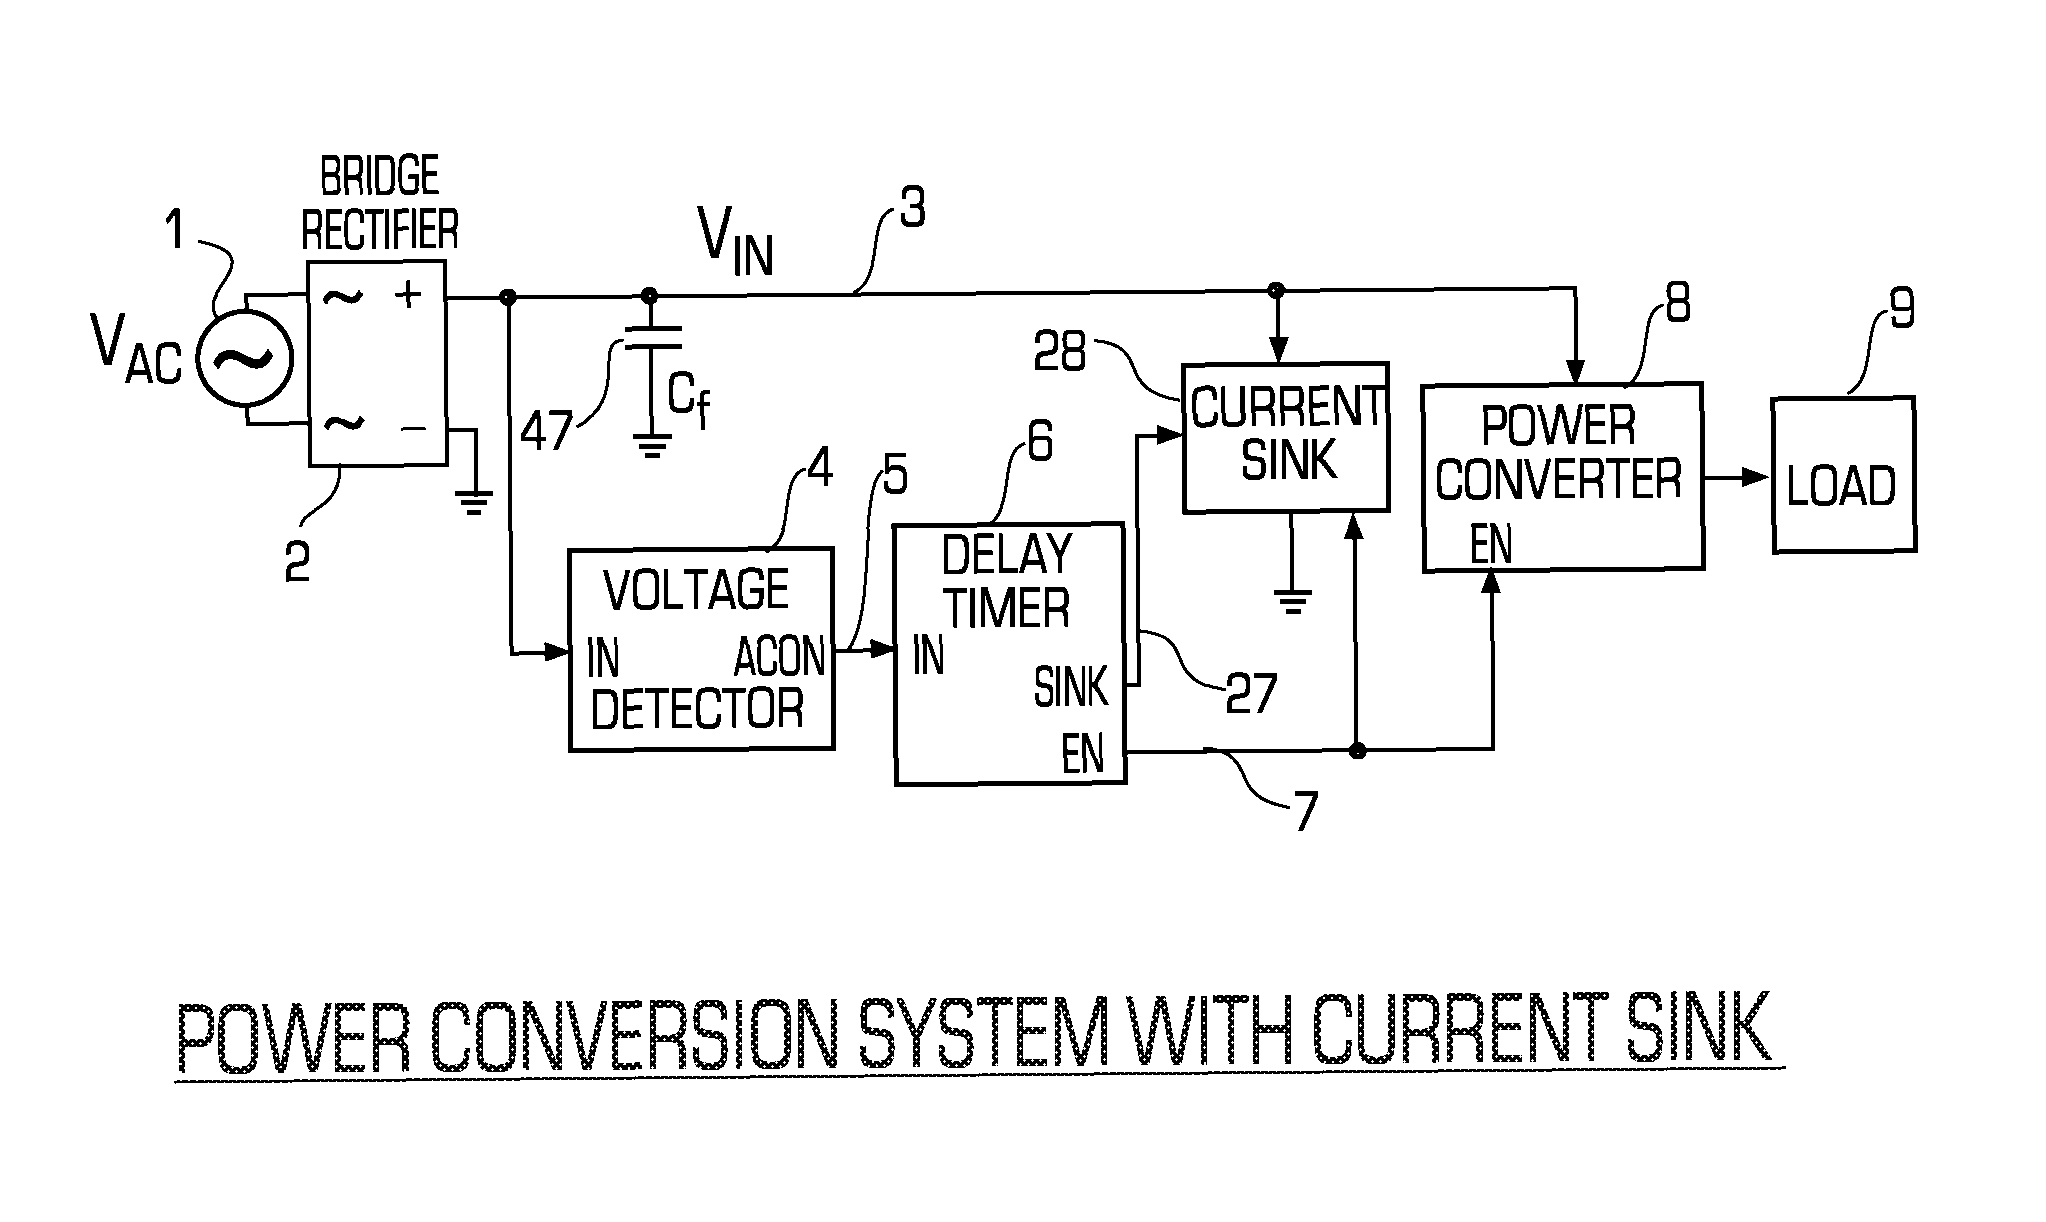 Method and apparatus for extending the power output range of a power converter used for a lighting system